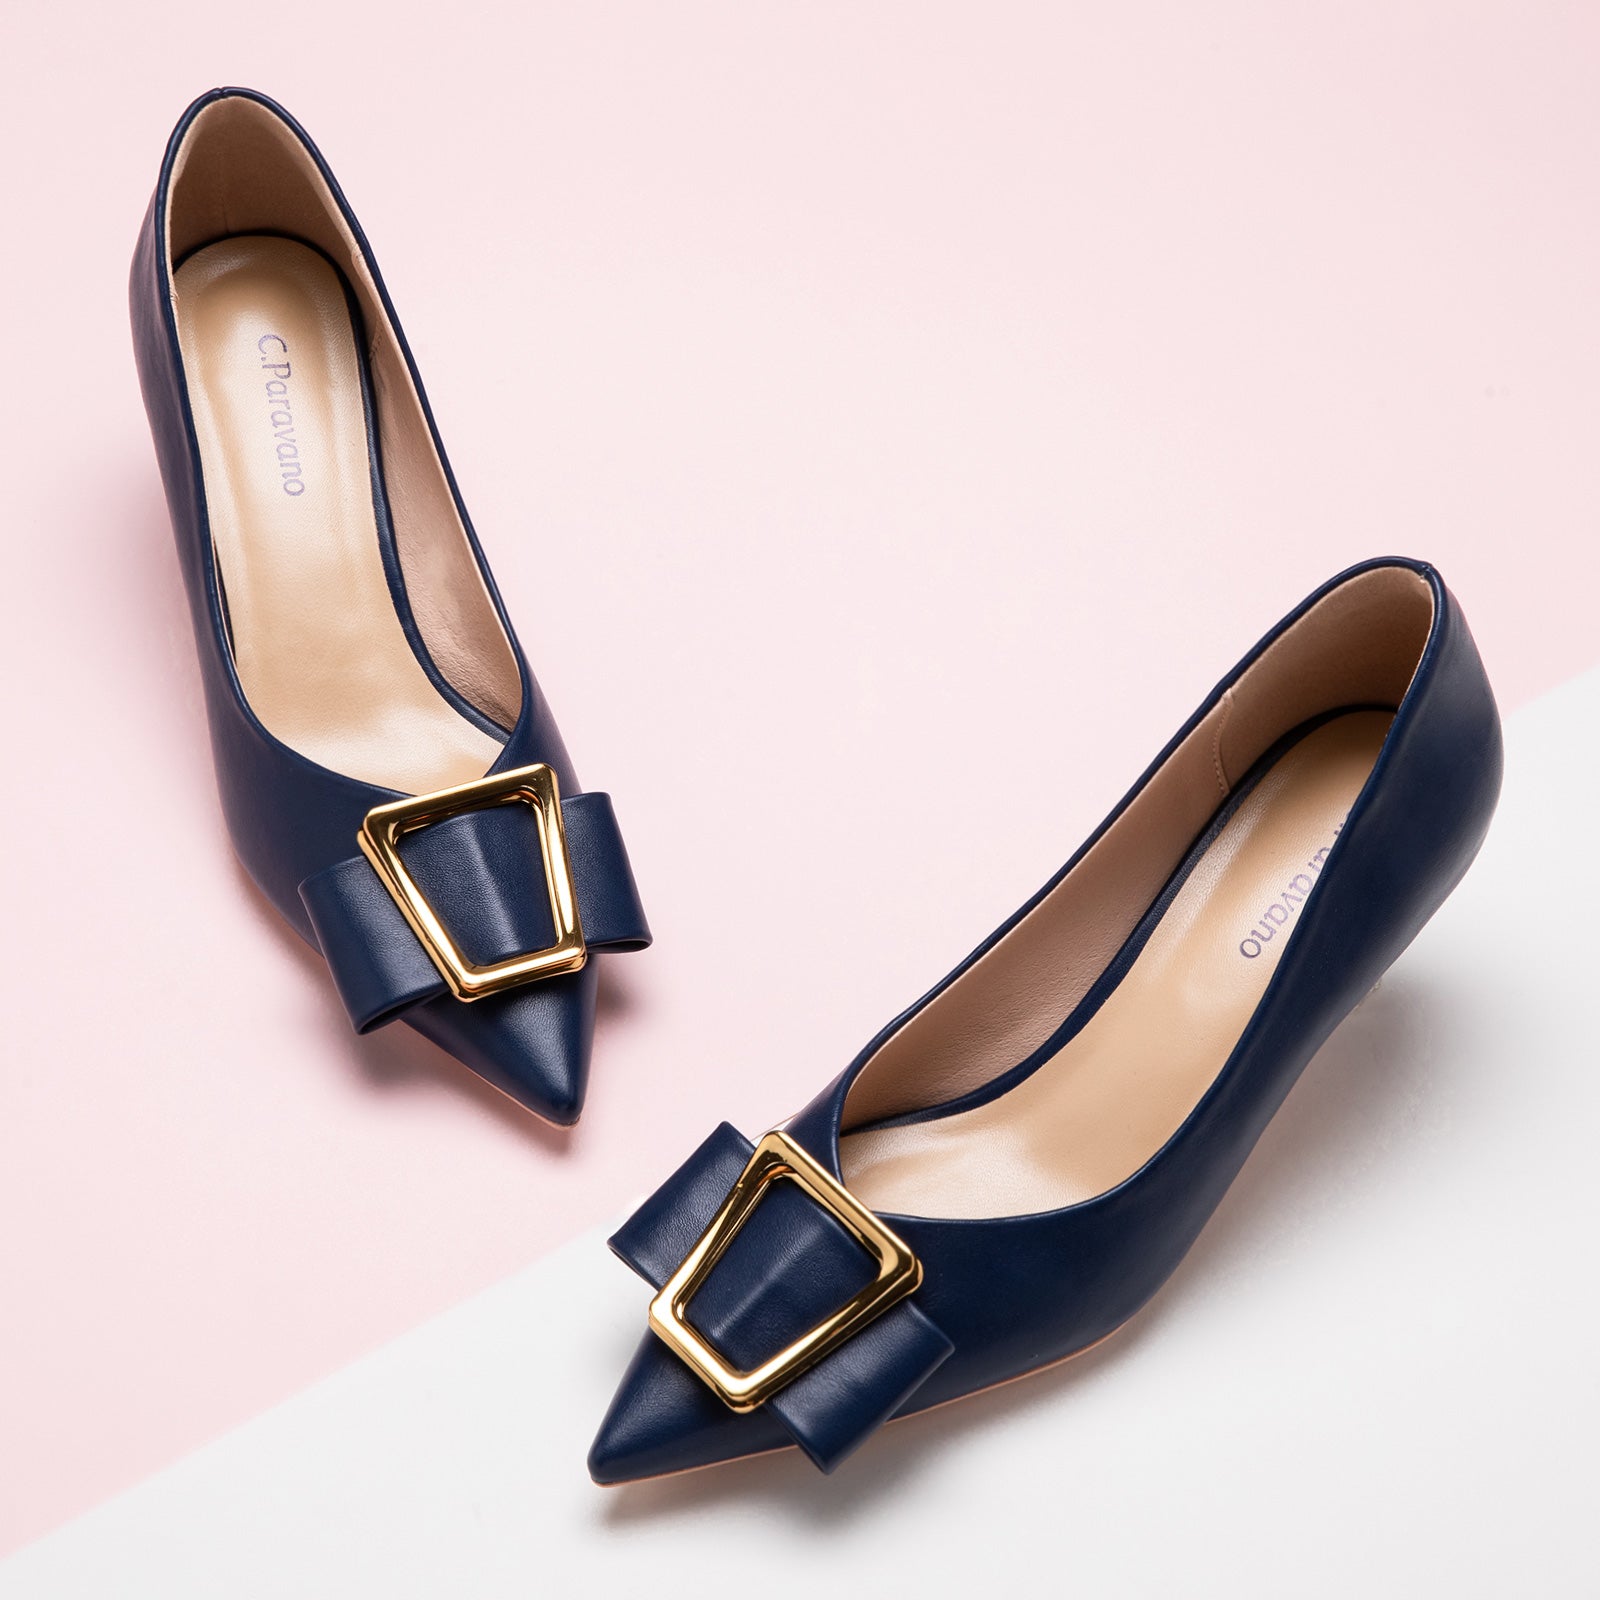 Navy Geometric Kitten Heel Women Pumps, a classic and sophisticated choice for versatile elegance